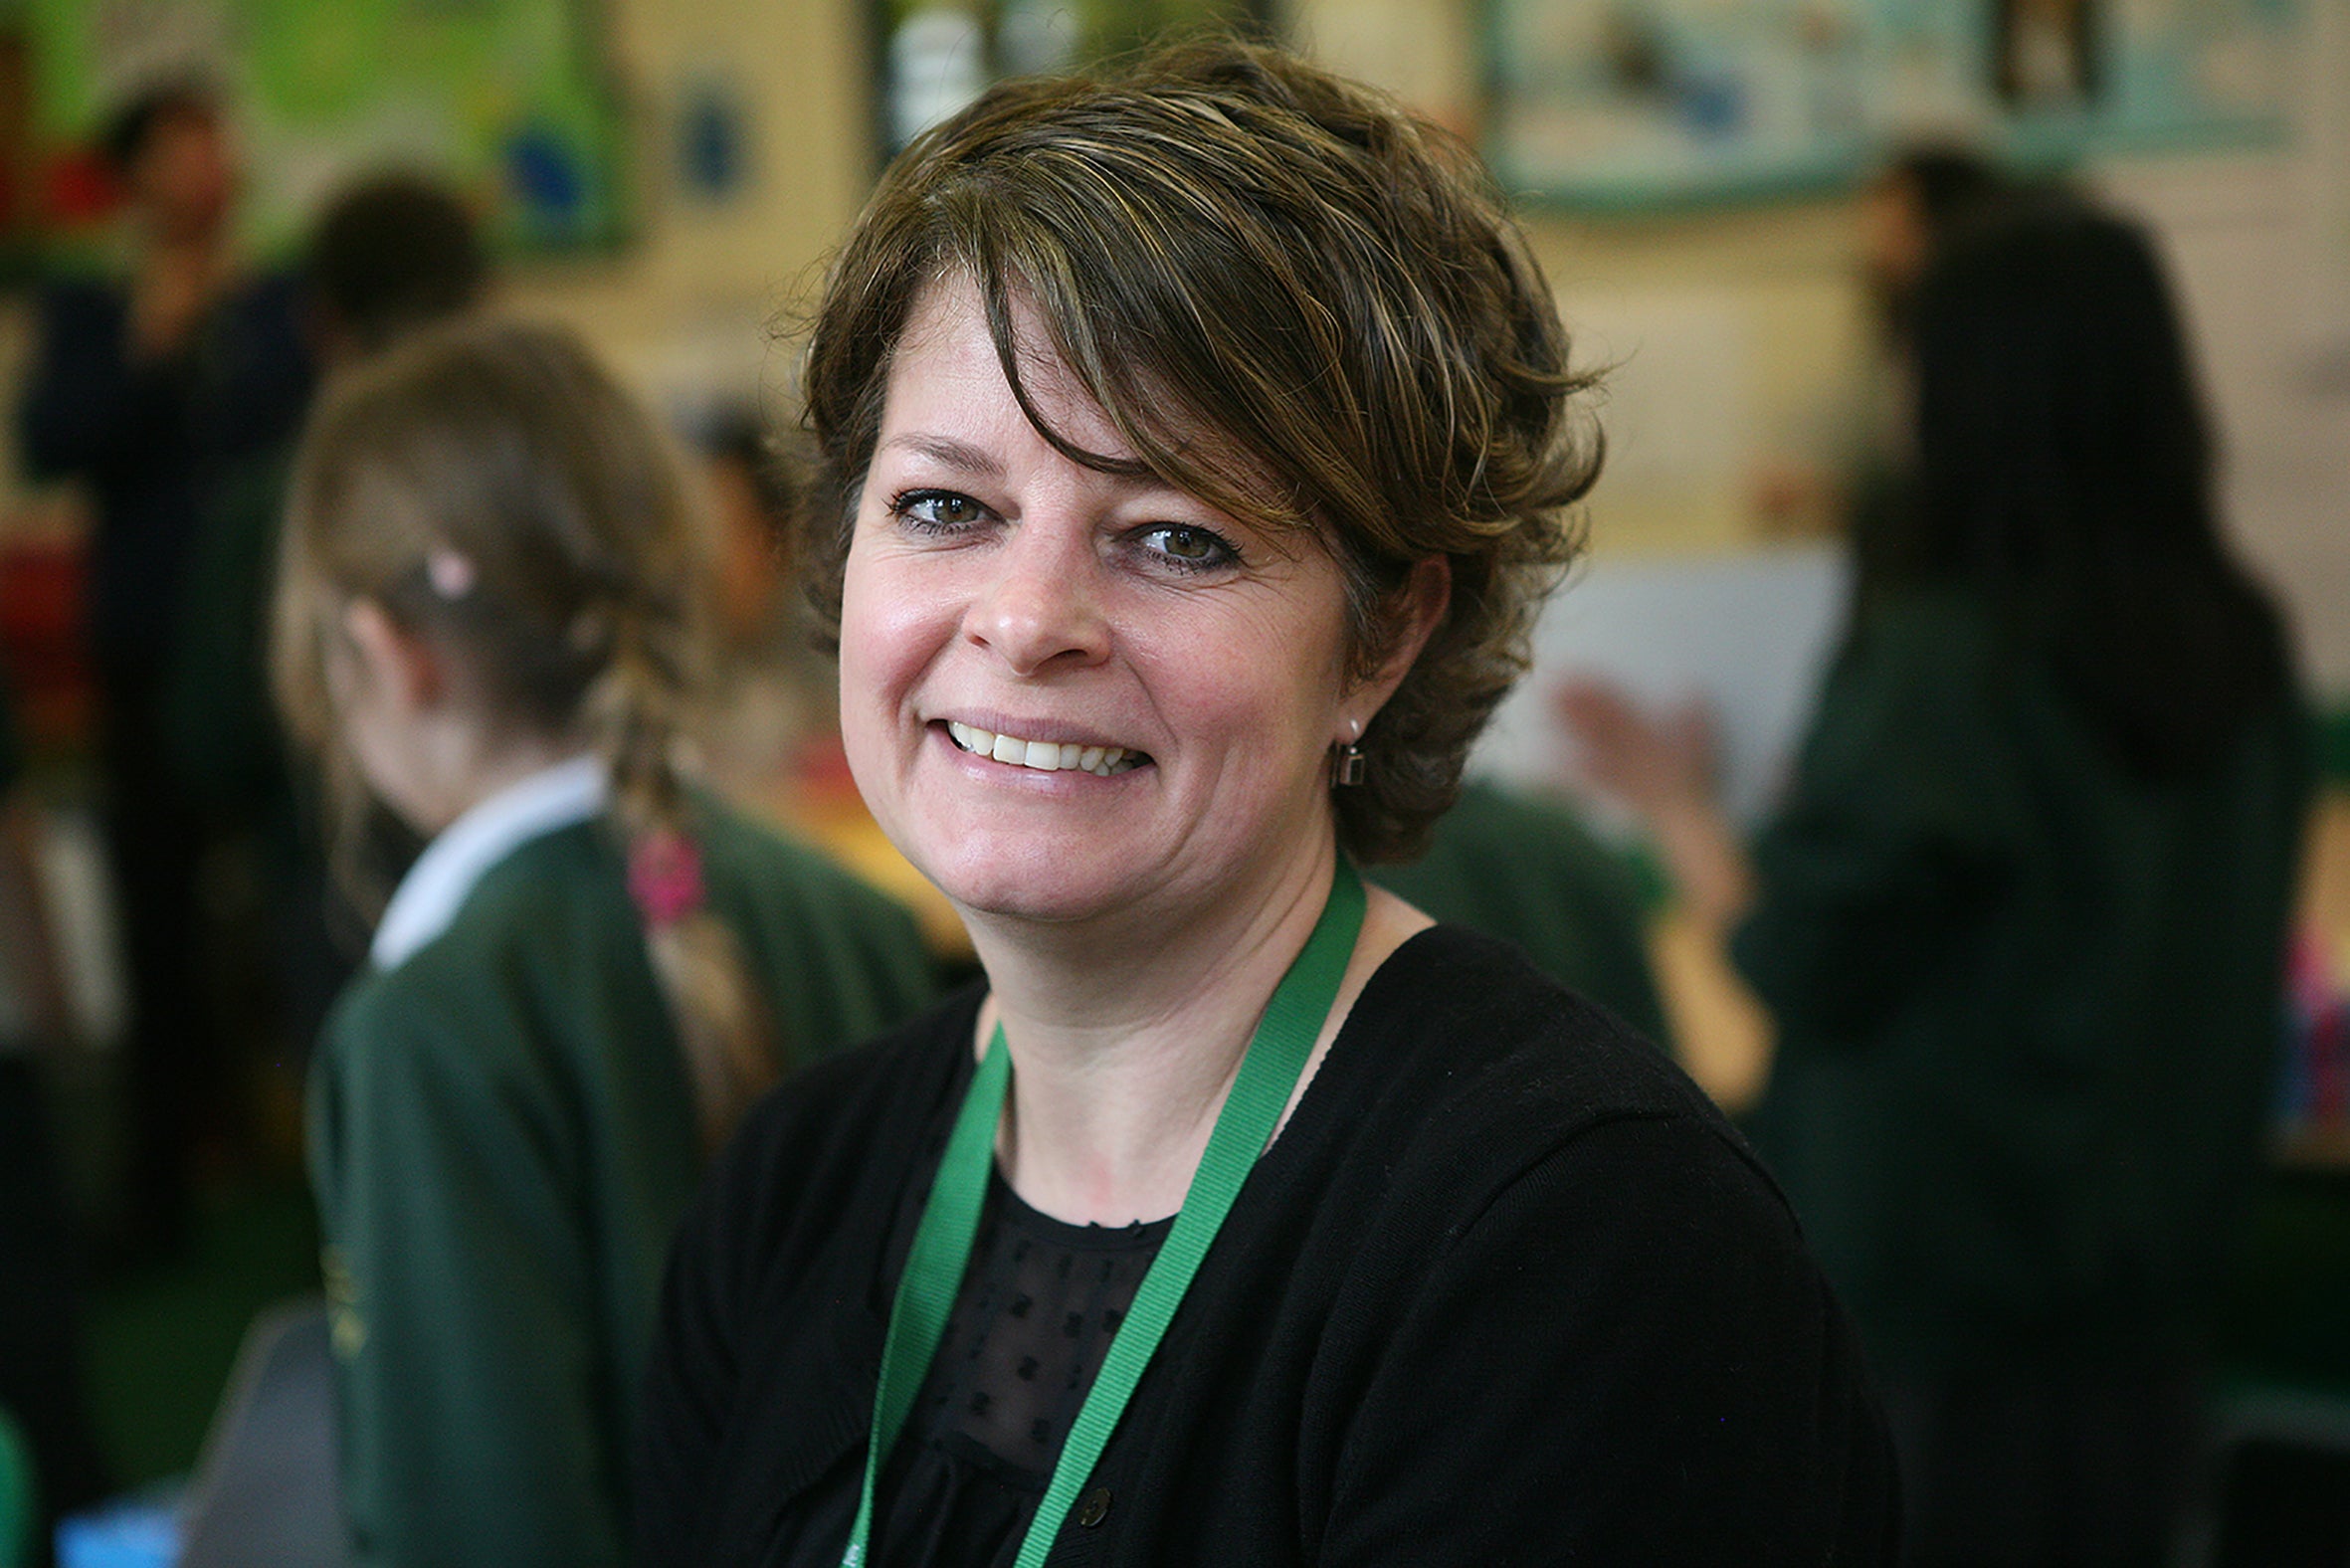 Headteacher Ruth Perry took her own life after her school was downgraded by Ofsted